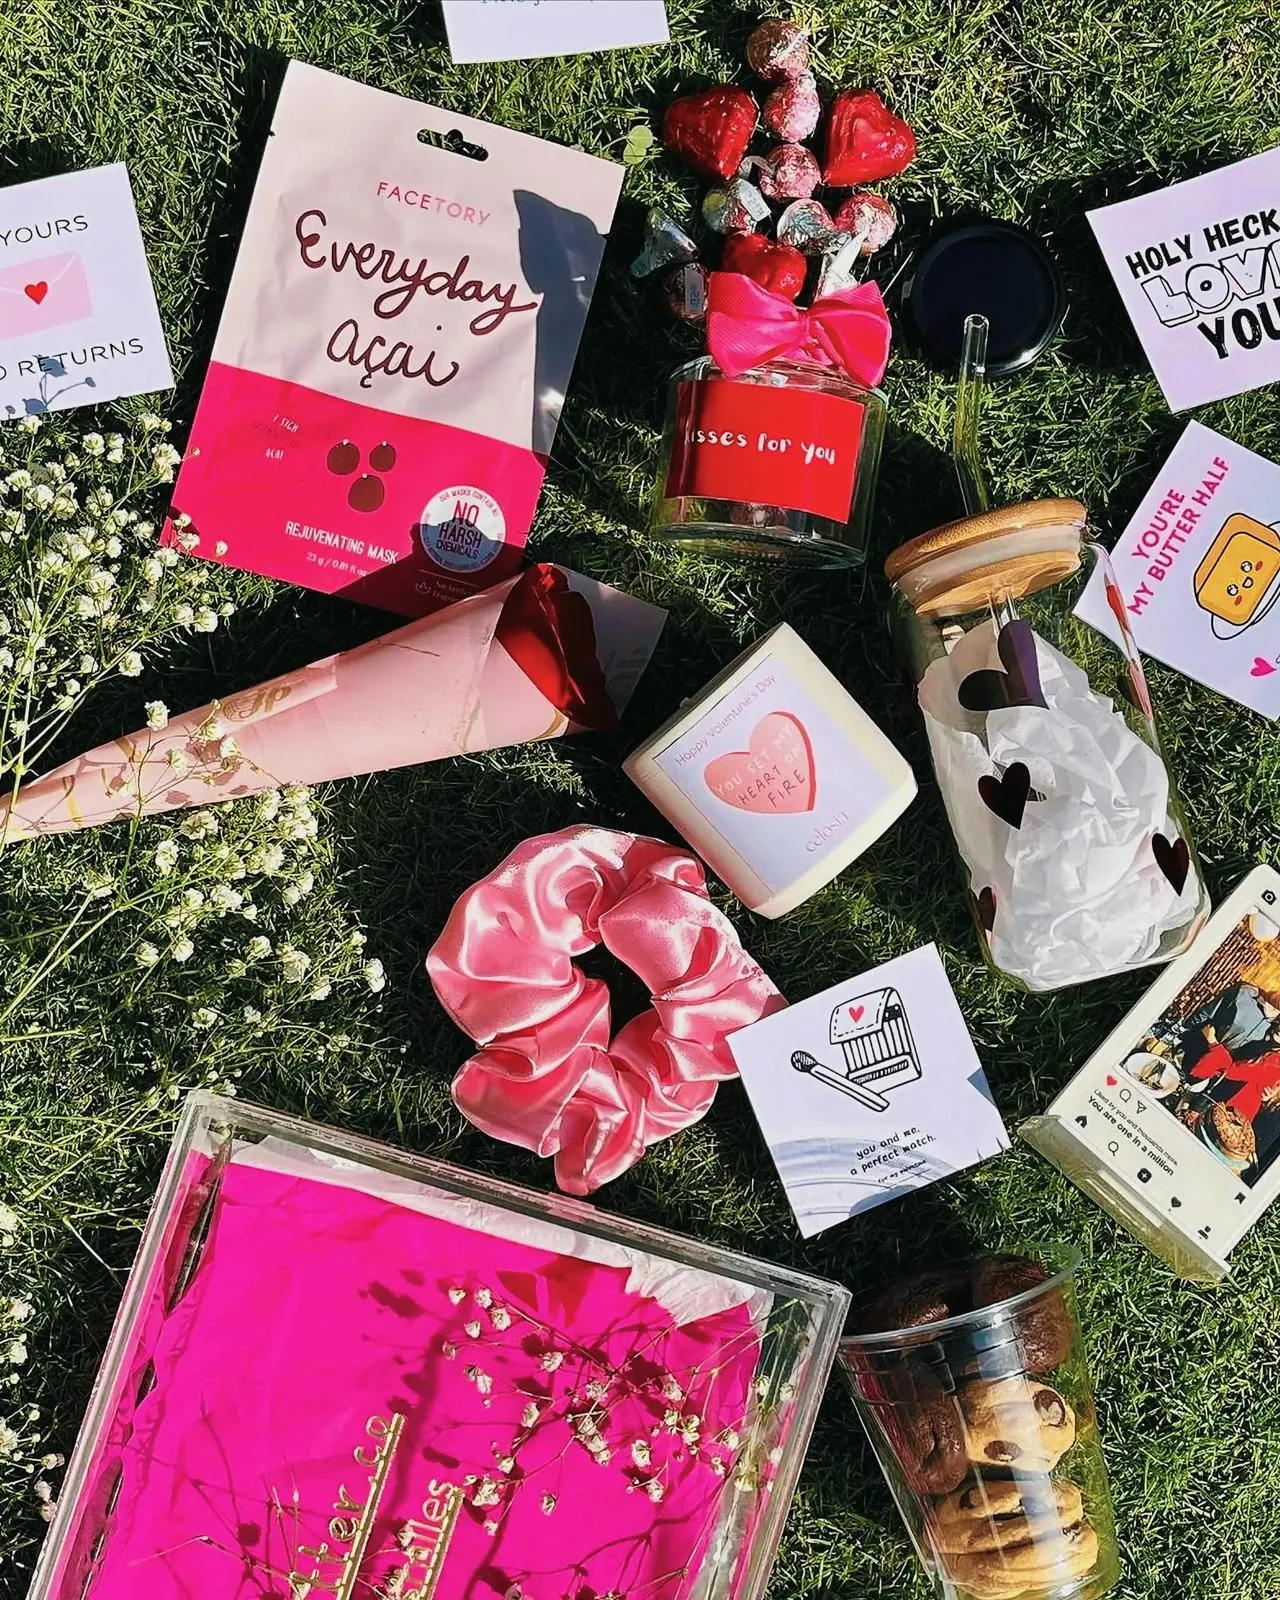 Valentine's Day gift box with cookies, scrunchie, and other items on a green grass backdrop